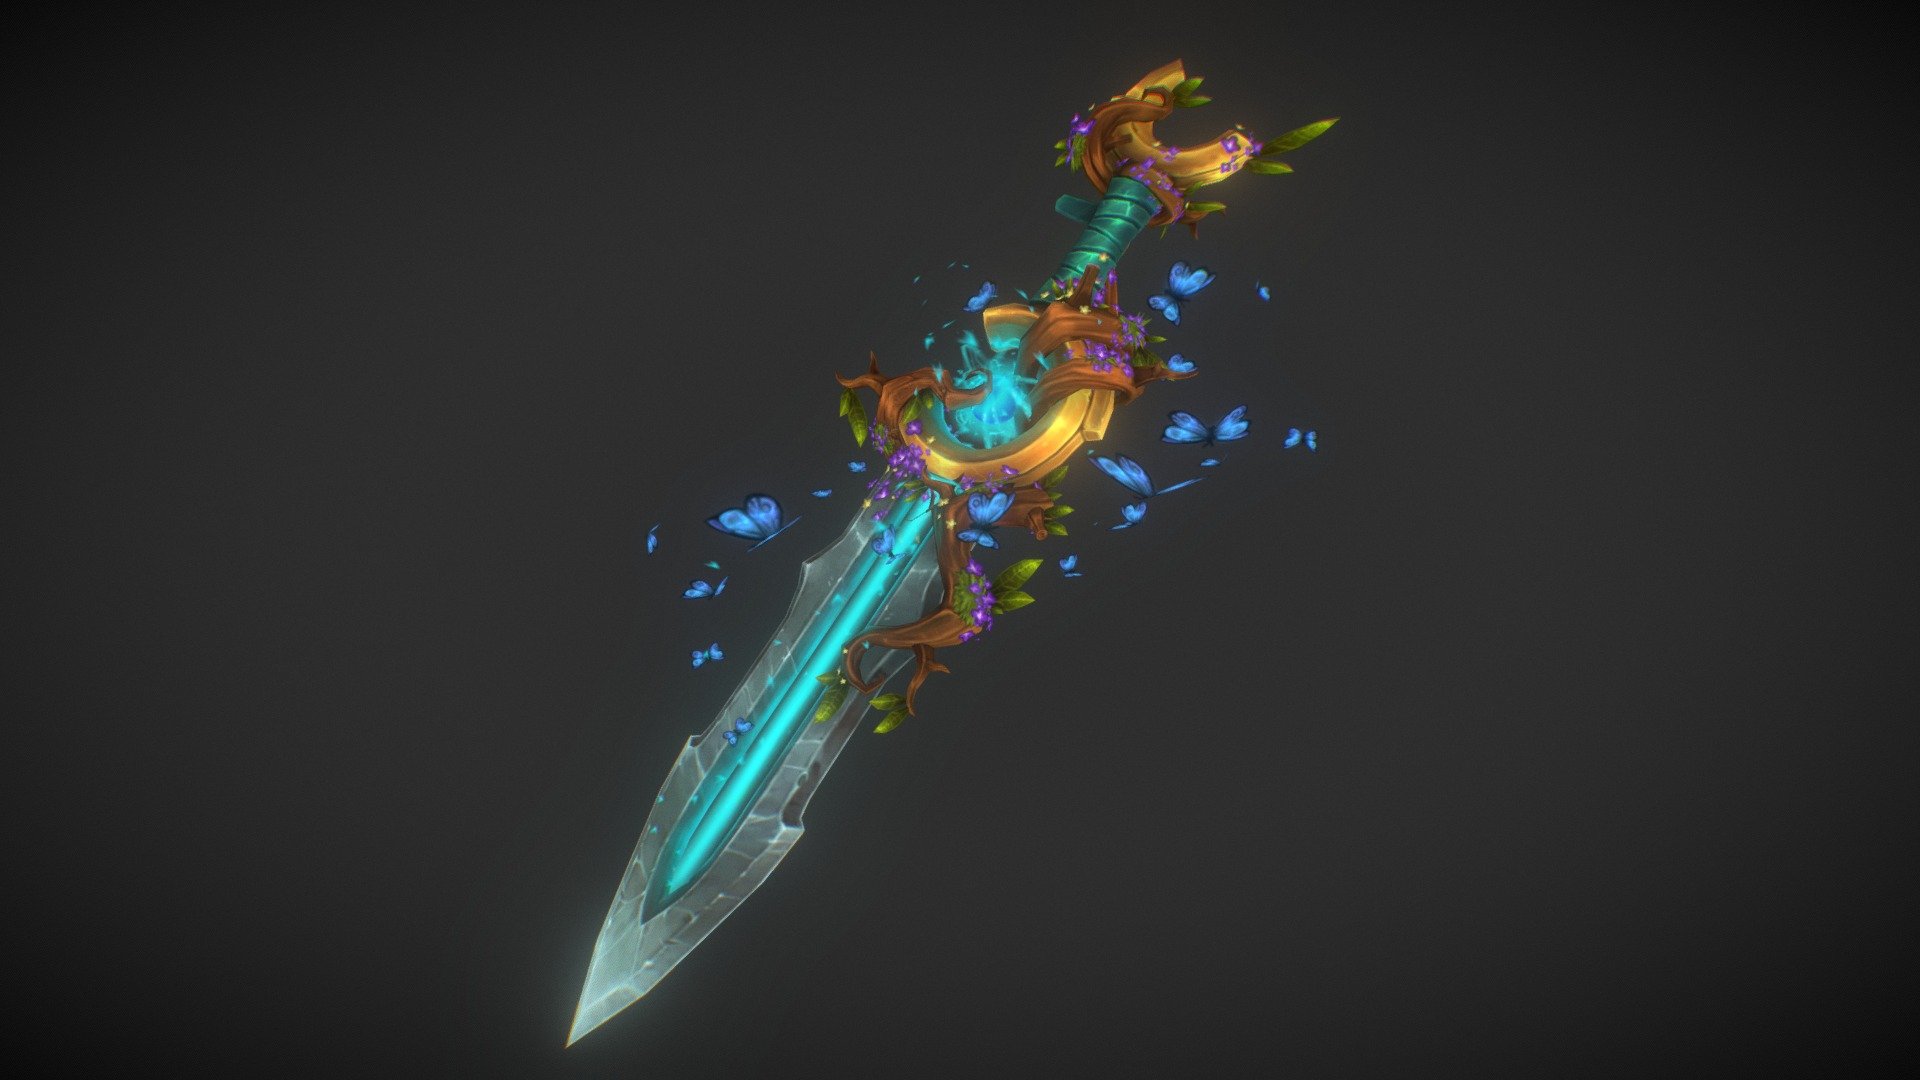 presonal project :) cocnept, 3d model and textures made by me. :) - Ovi the magical sword - 3D model by evelyn.evie (@evelynsoa) 3d model